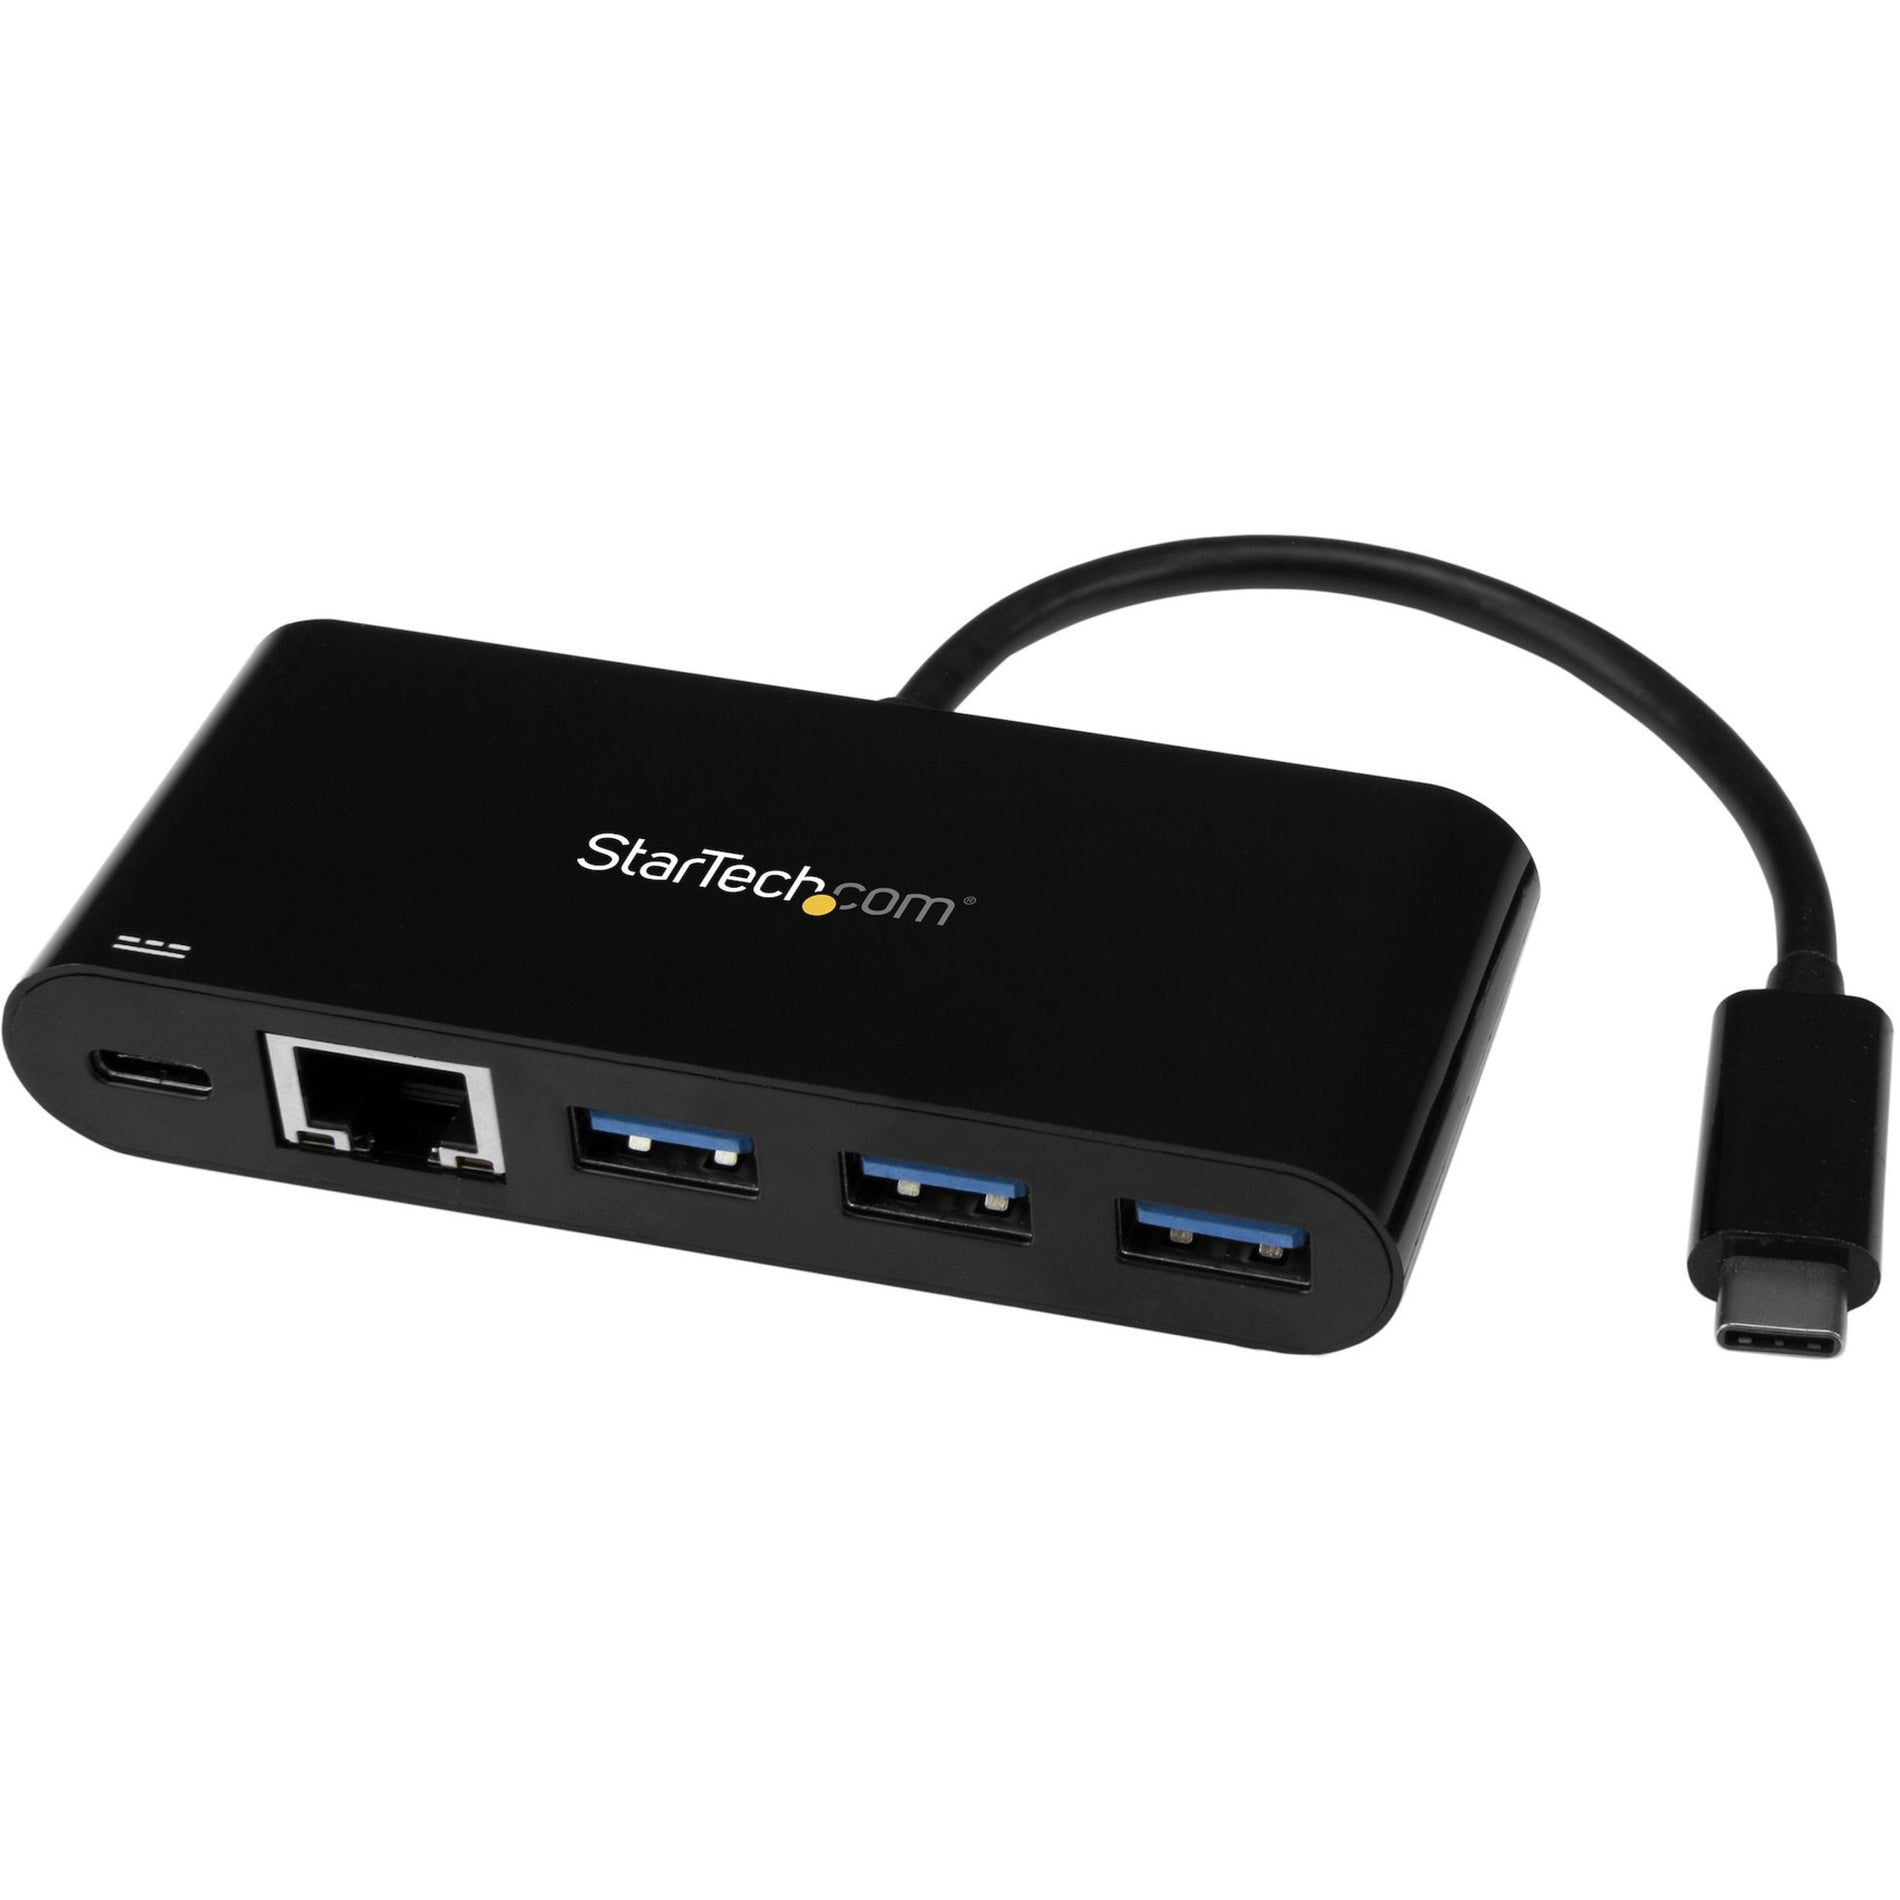 StarTech.com HB30C3AGEPD 3-Port USB 3.0 Hub with Gigabit Ethernet and Power Delivery - USB Type C Hub with GbE and PD 2.0